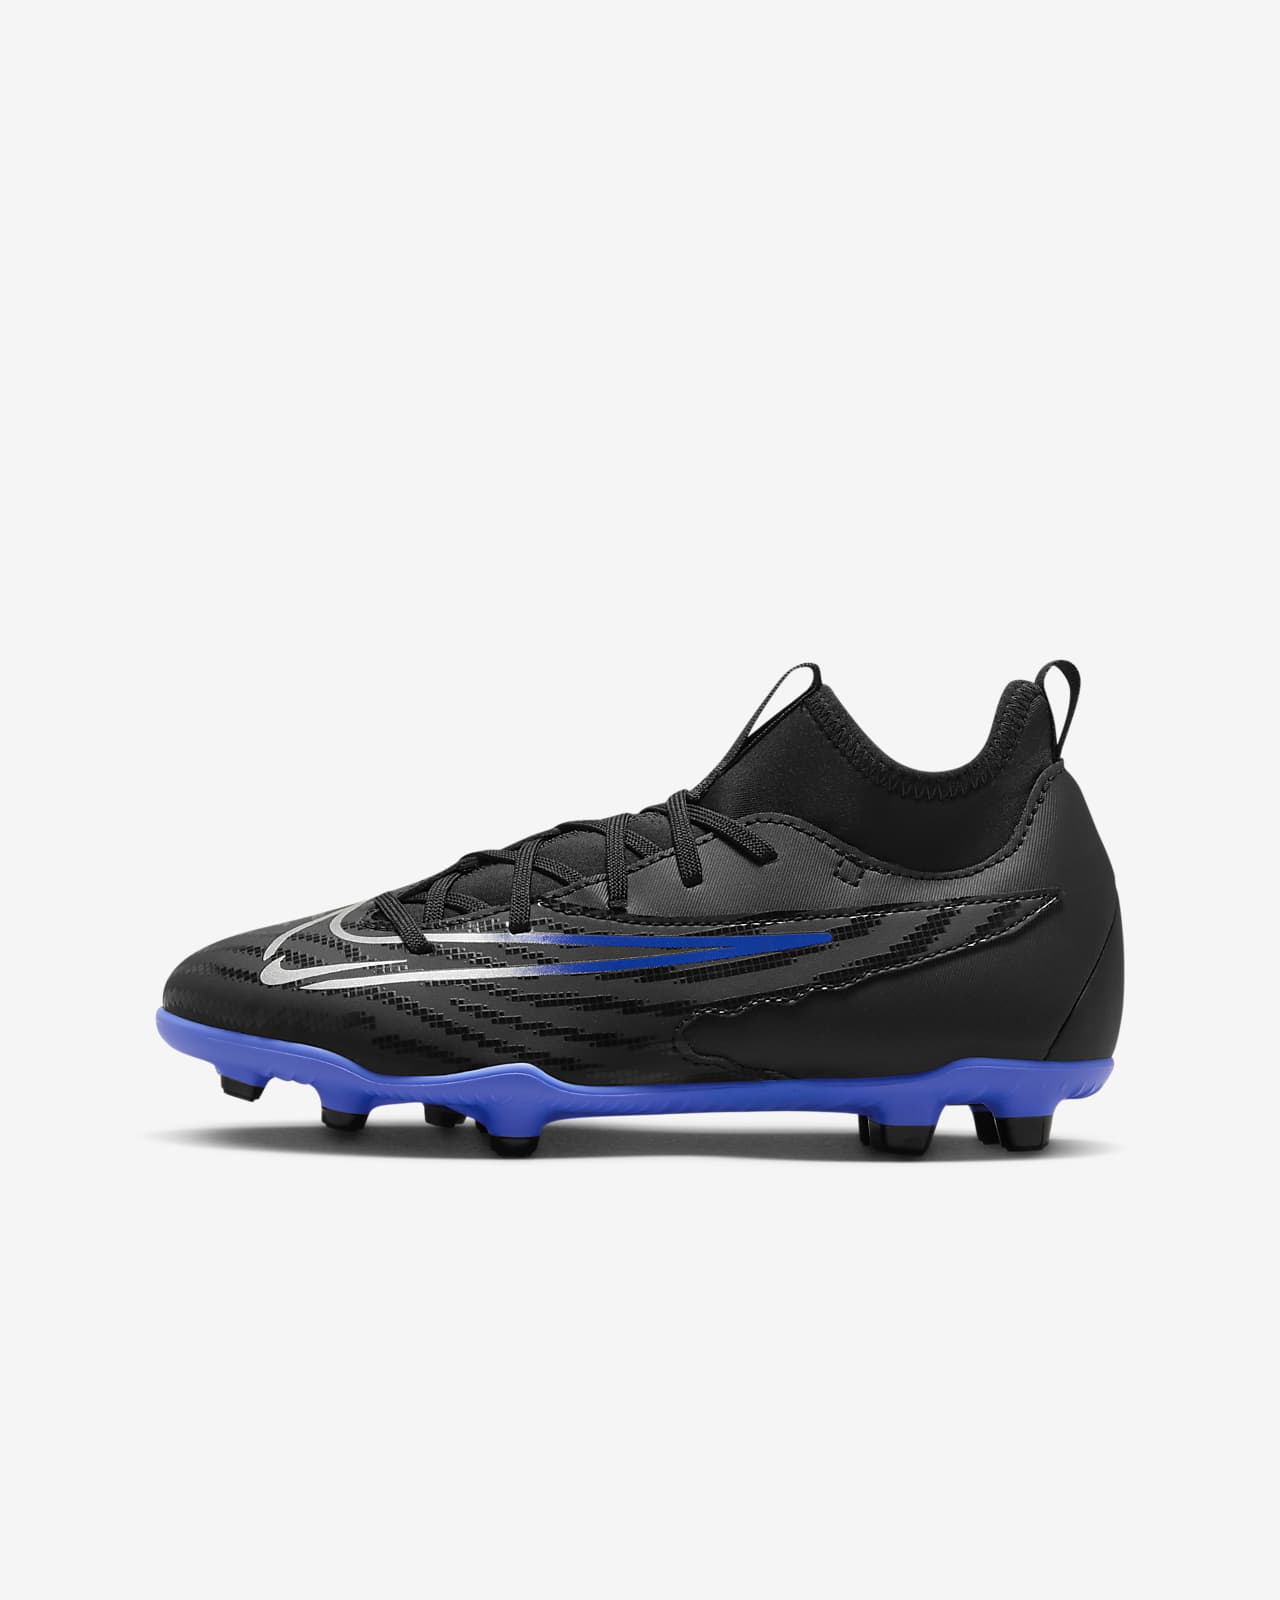 Les meilleures chaussures à crampons Nike Football. Nike LU